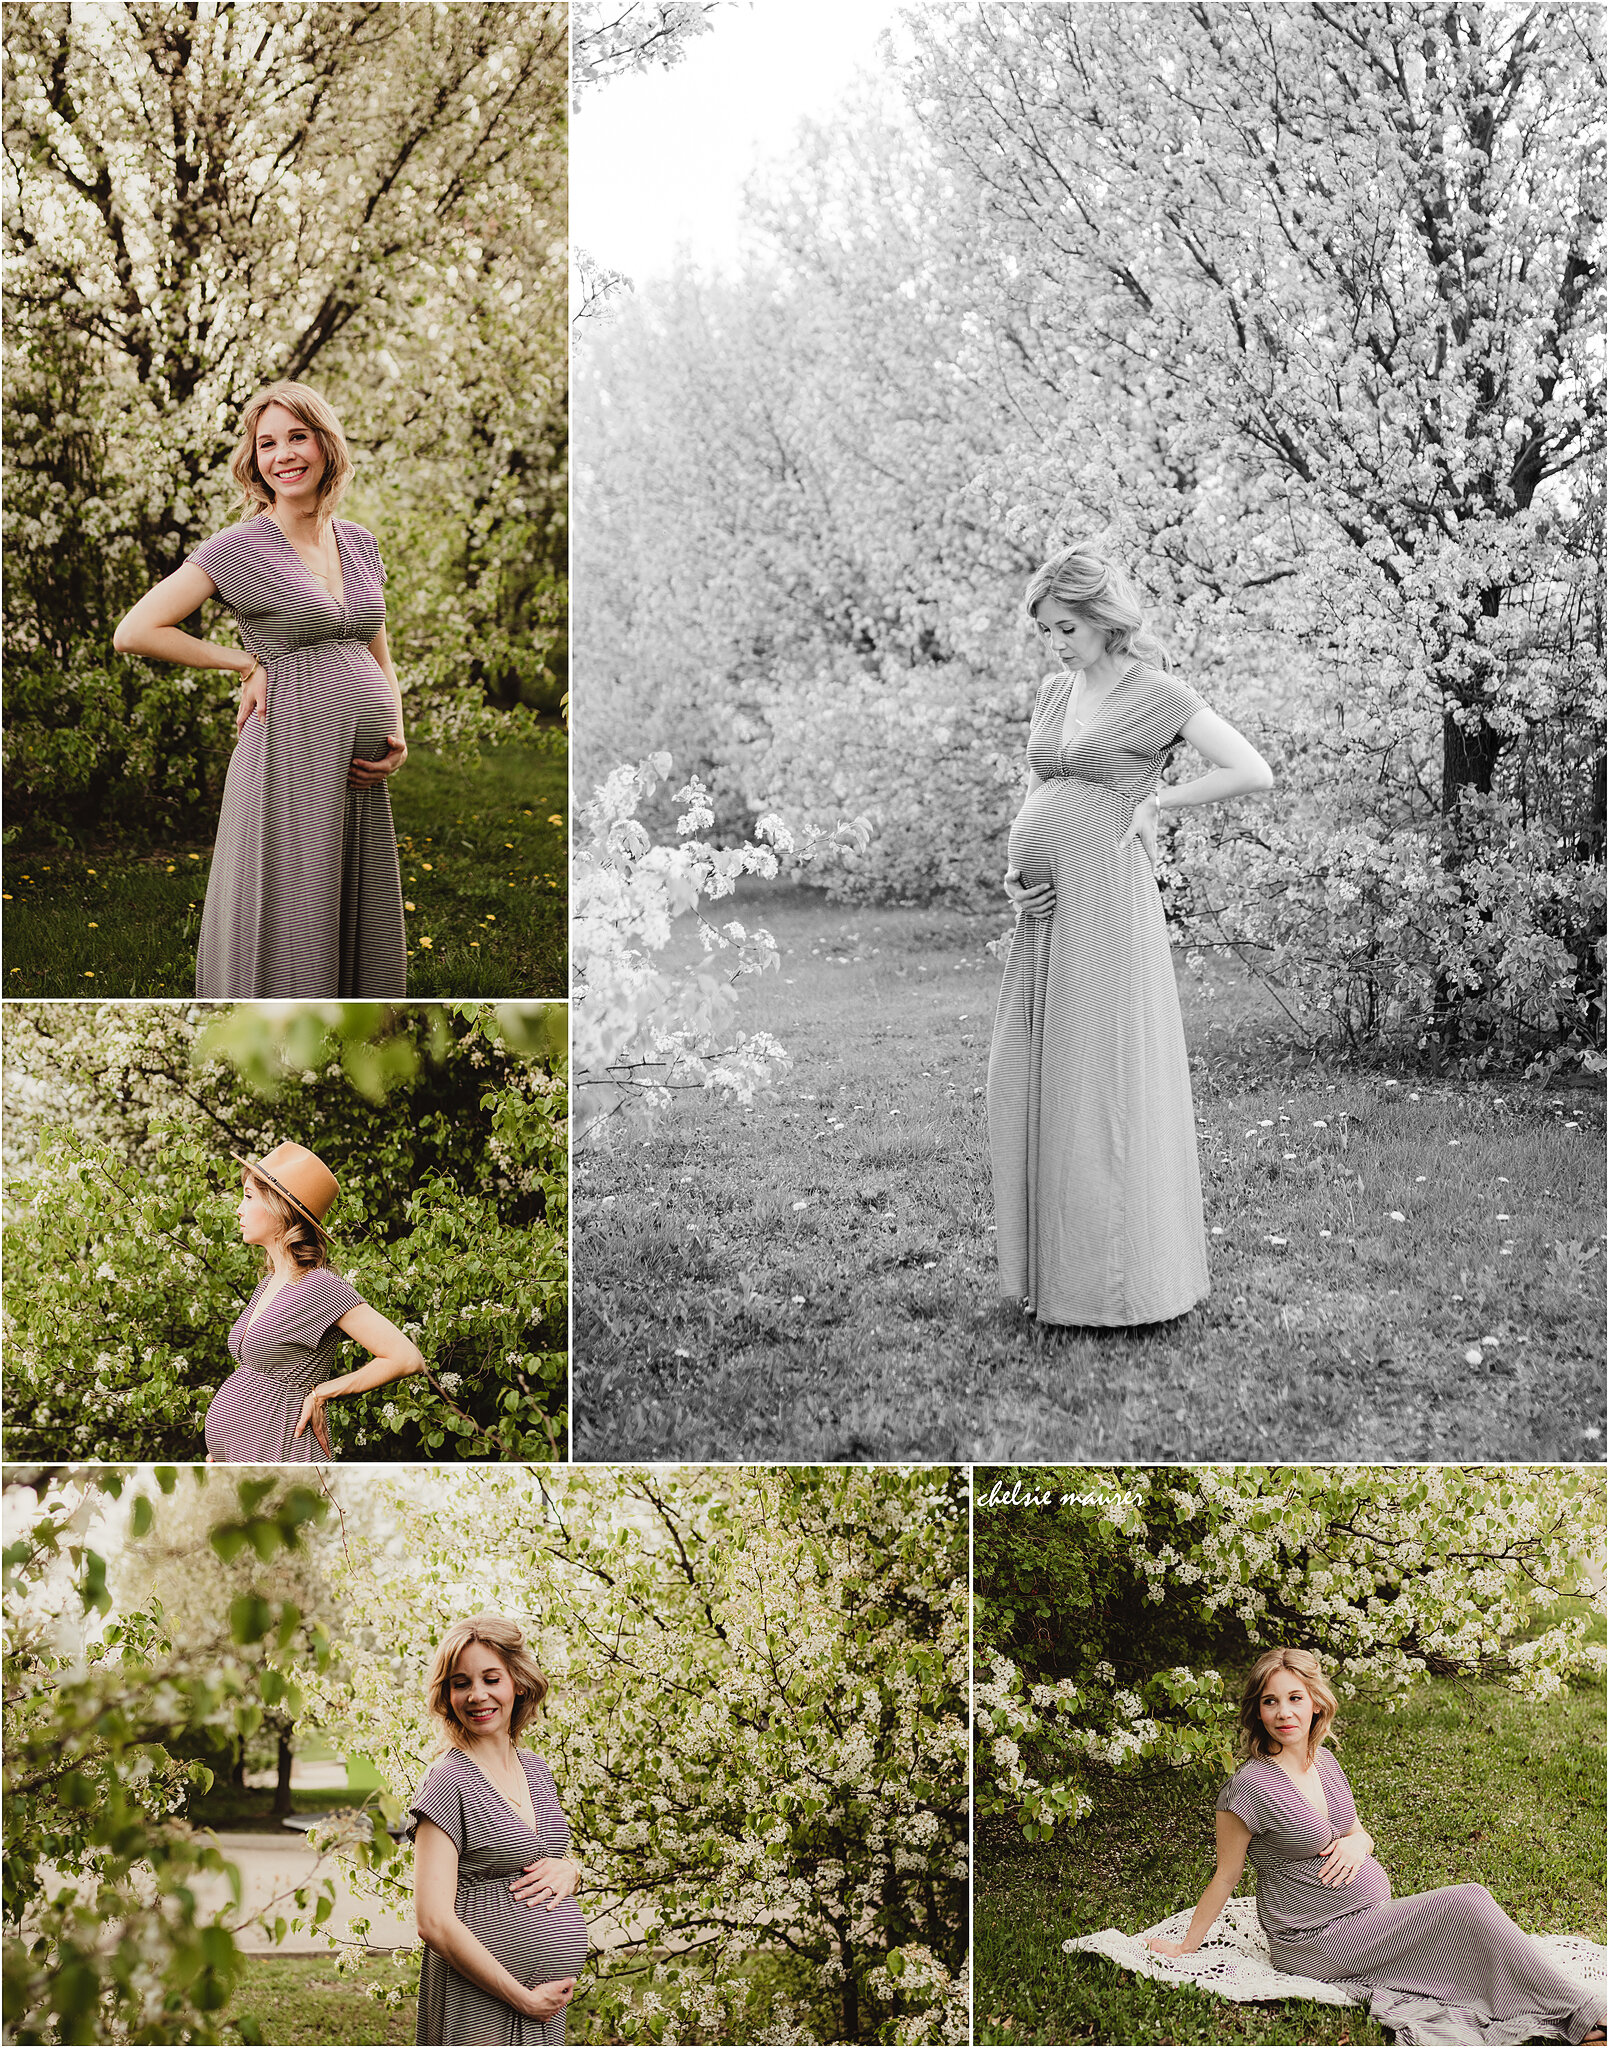 A Spring Maternity Photo Session in Macomb, MI | Pam — Chelsie Maurer  Photography